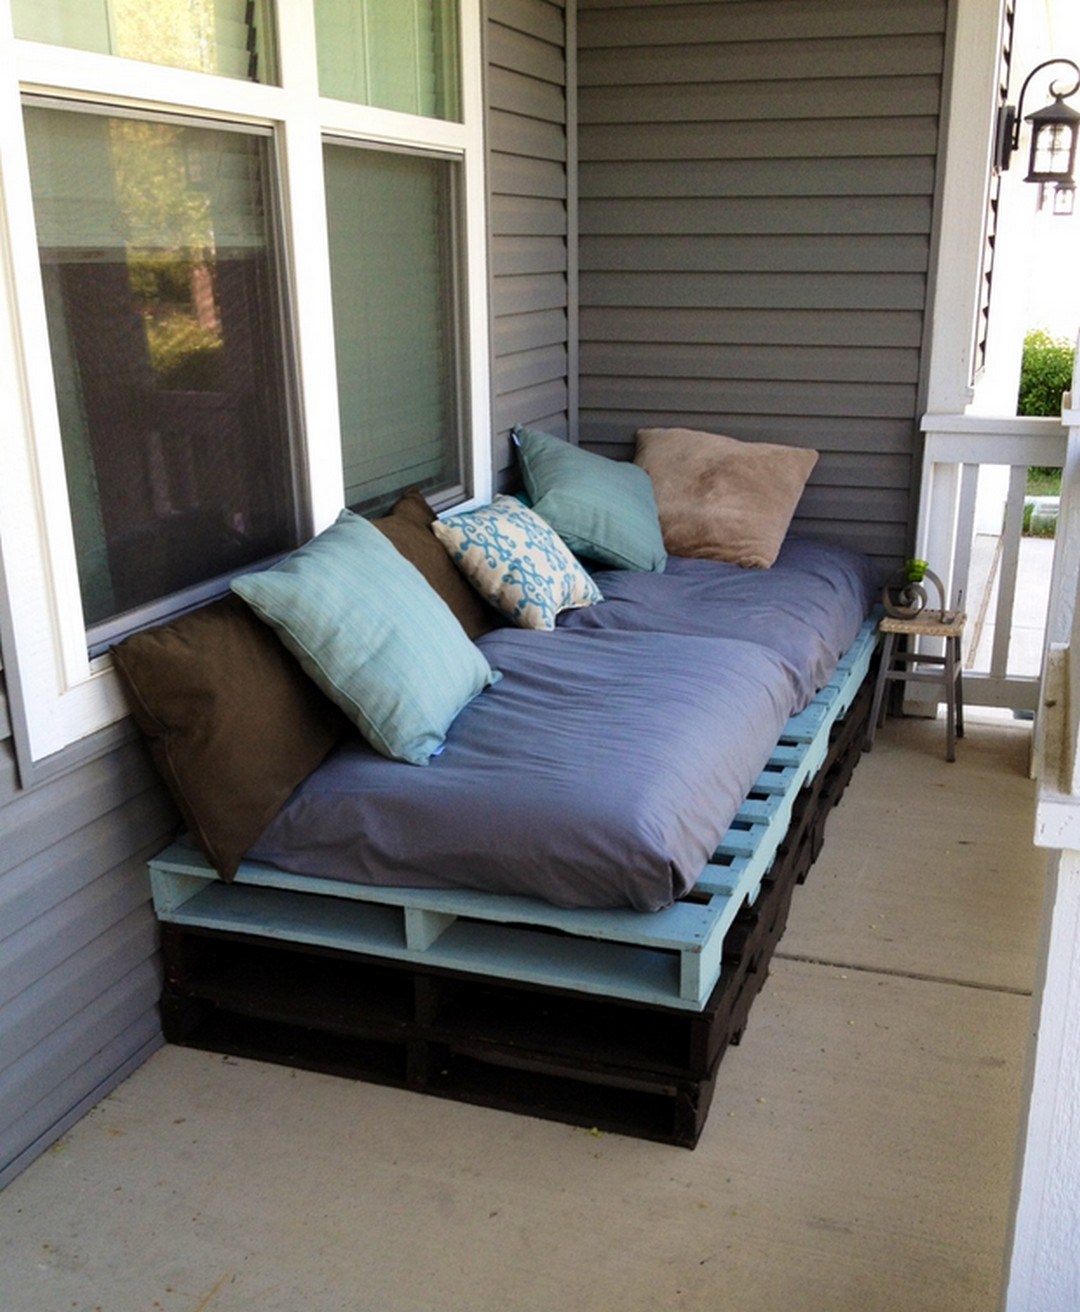 47-DIY-Pallet-Projects-That-Are-Easy-To-Decorate-Your-Space-26.jpg